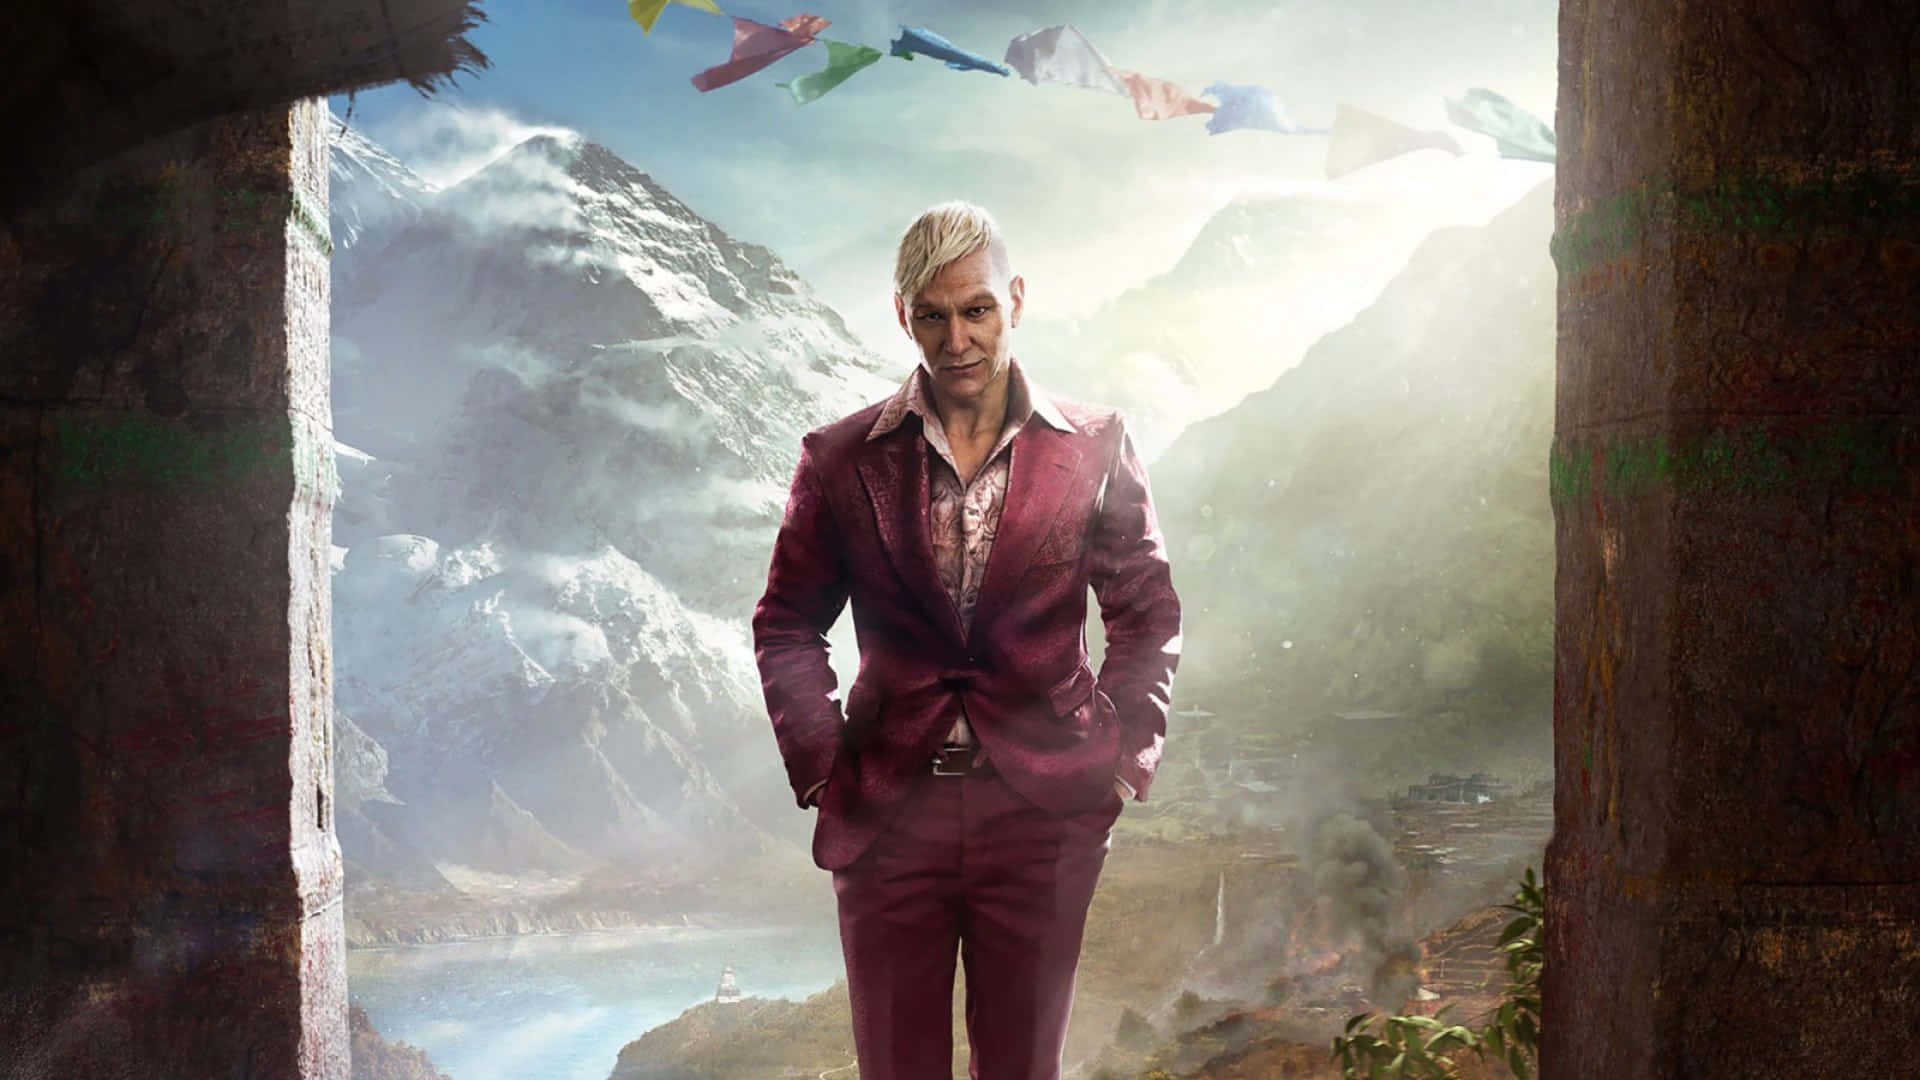 Explore the world of Kyrat and brace for adventure in Far Cry 4